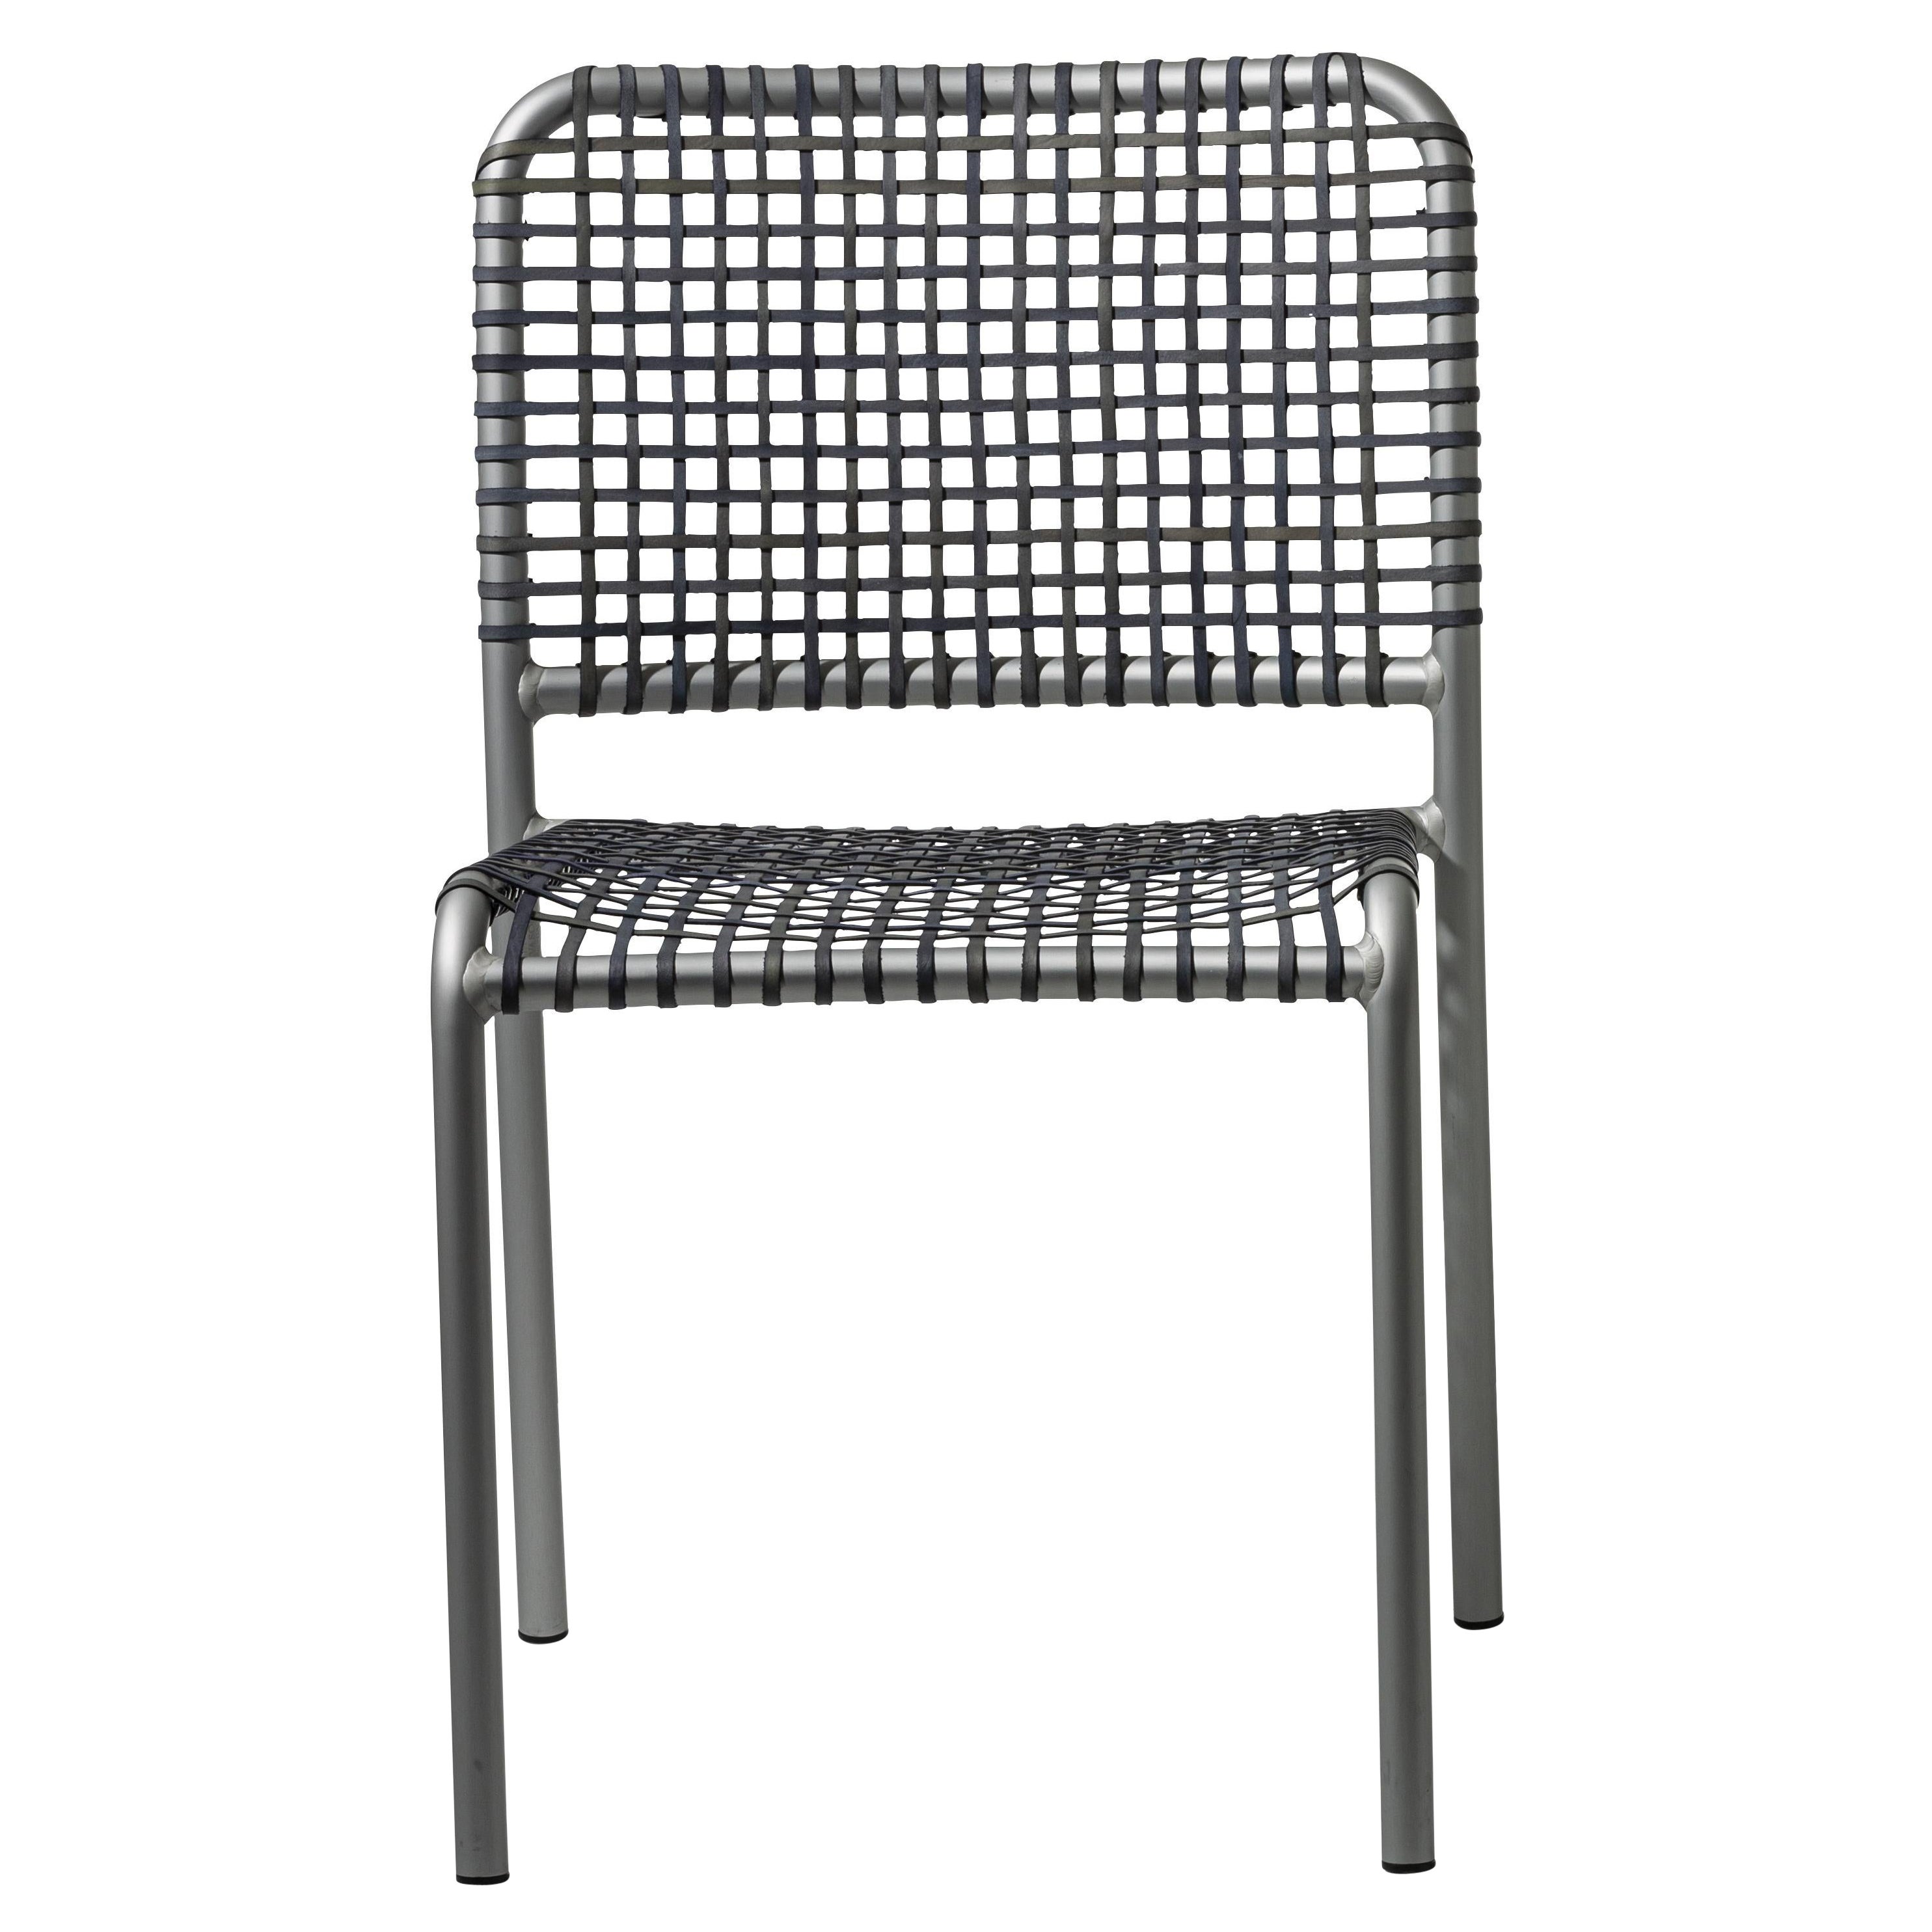 Gervasoni Allu 223 I Chair in Aluminium Frame and Woven with Grey Rawhide For Sale